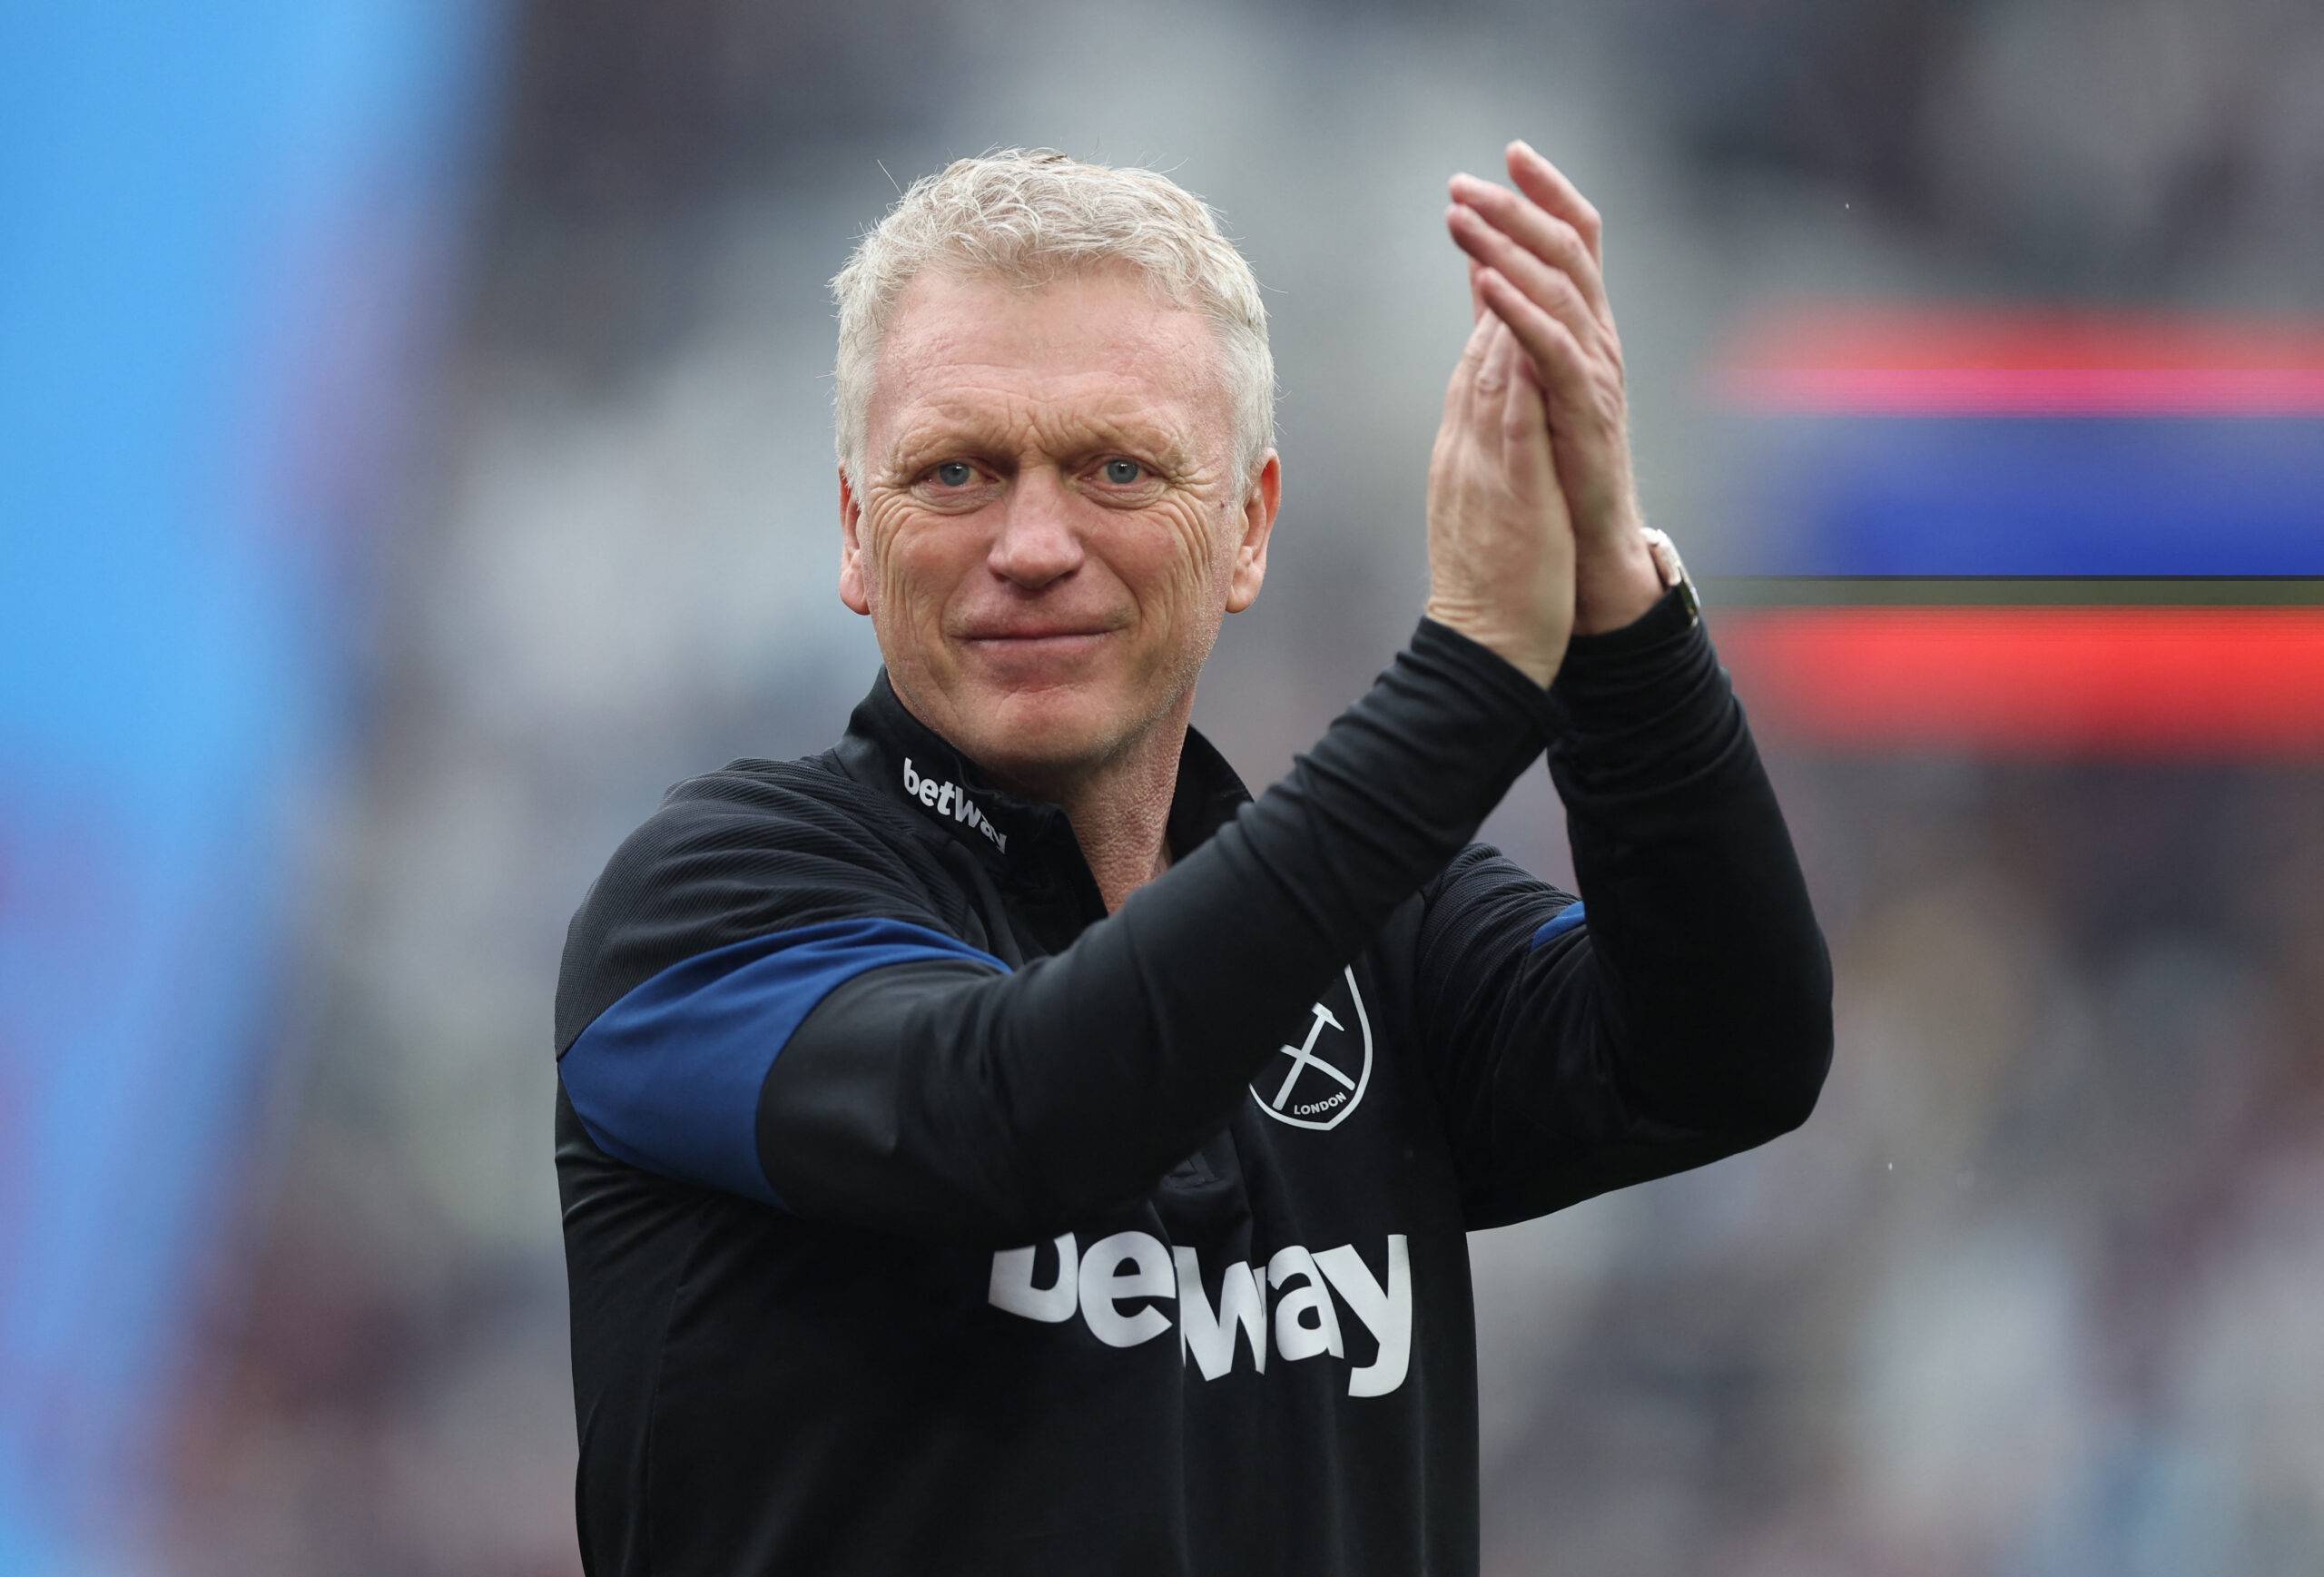 David Moyes applauds the crown following a Premier League game at the London Stadium